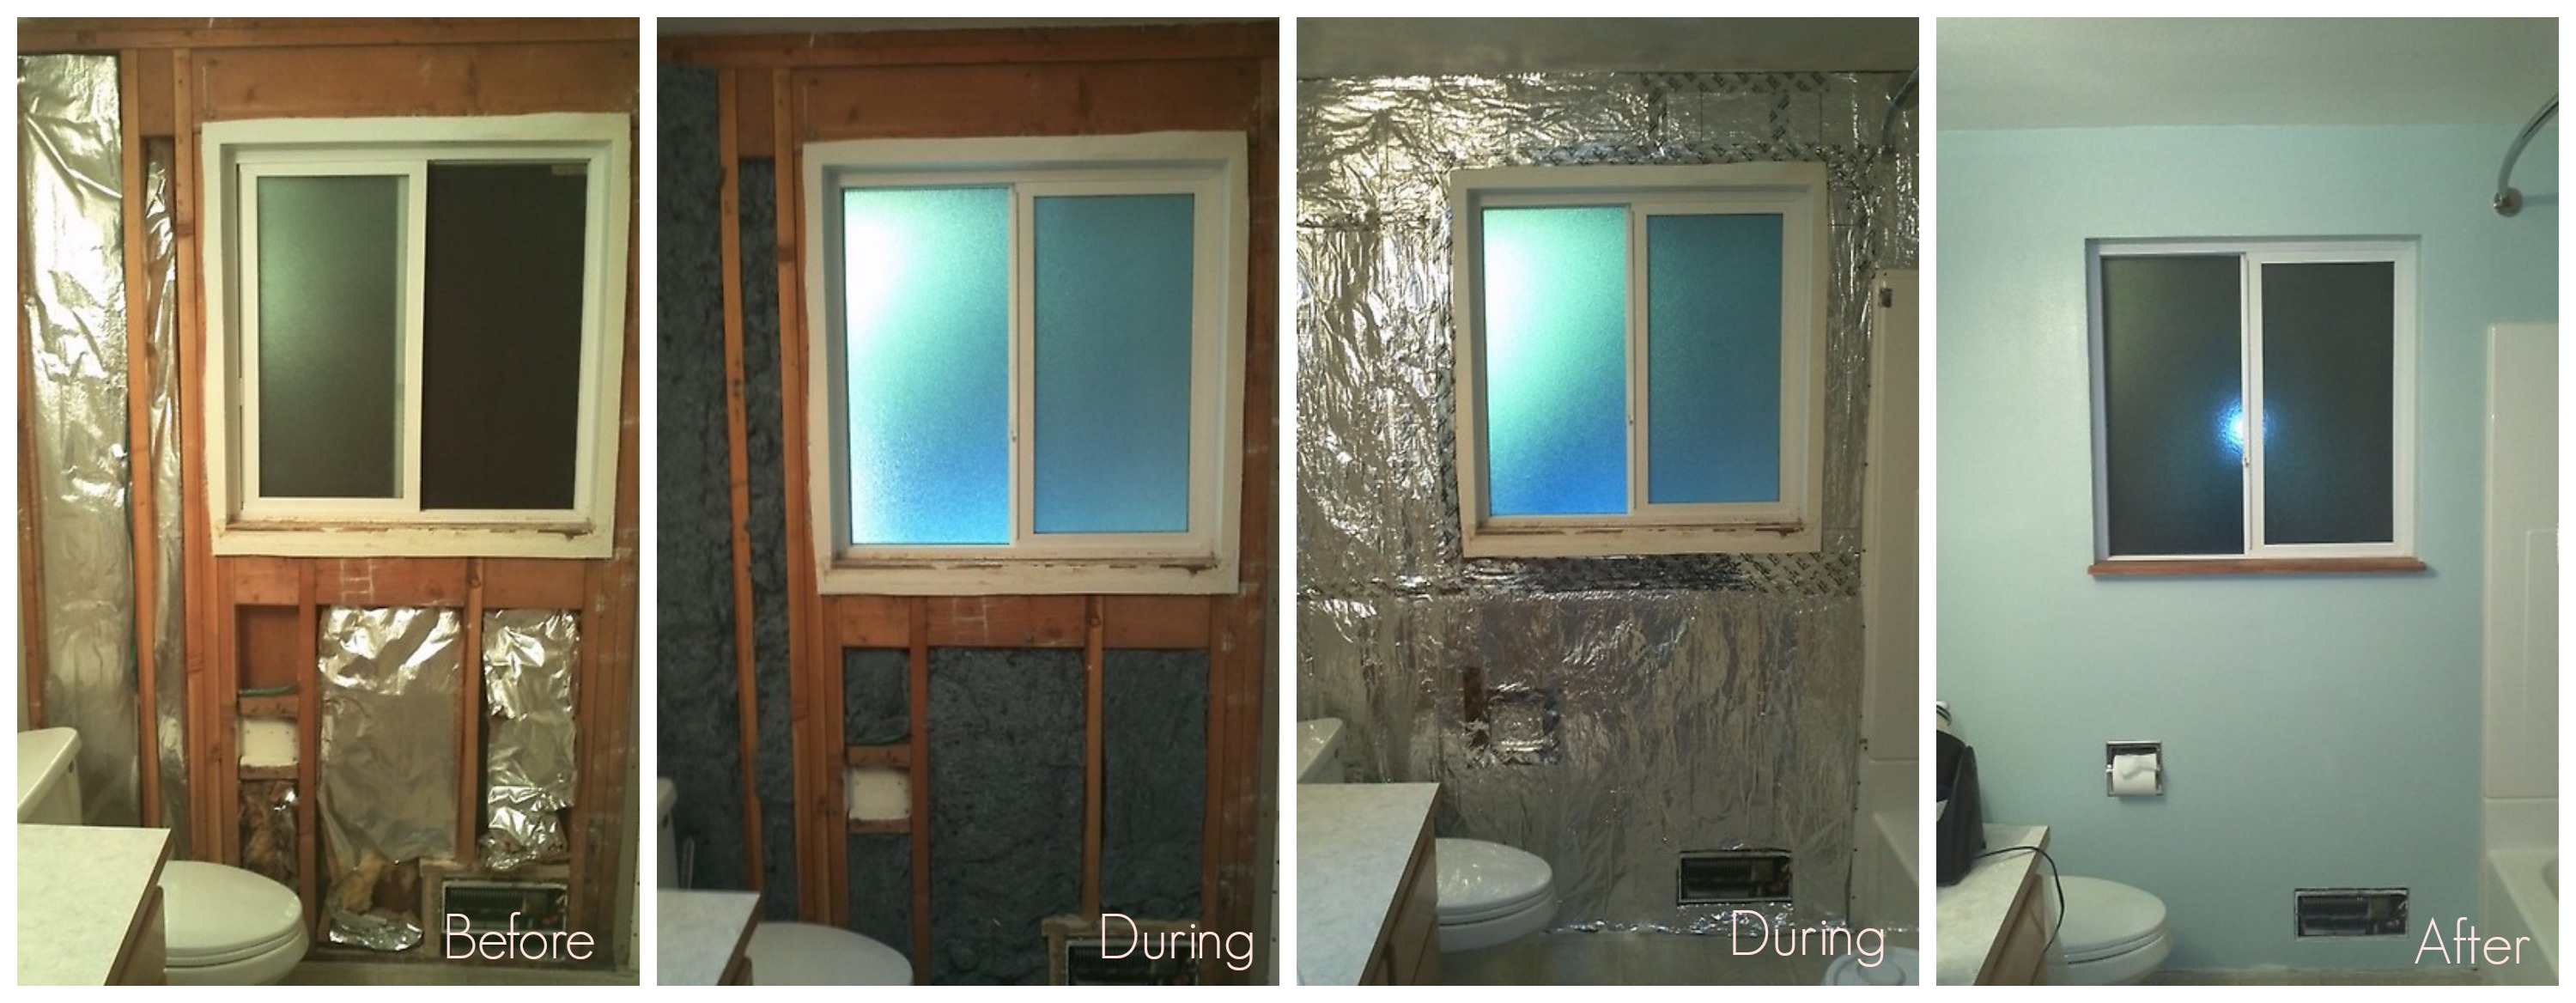 insulation before and after.jpg